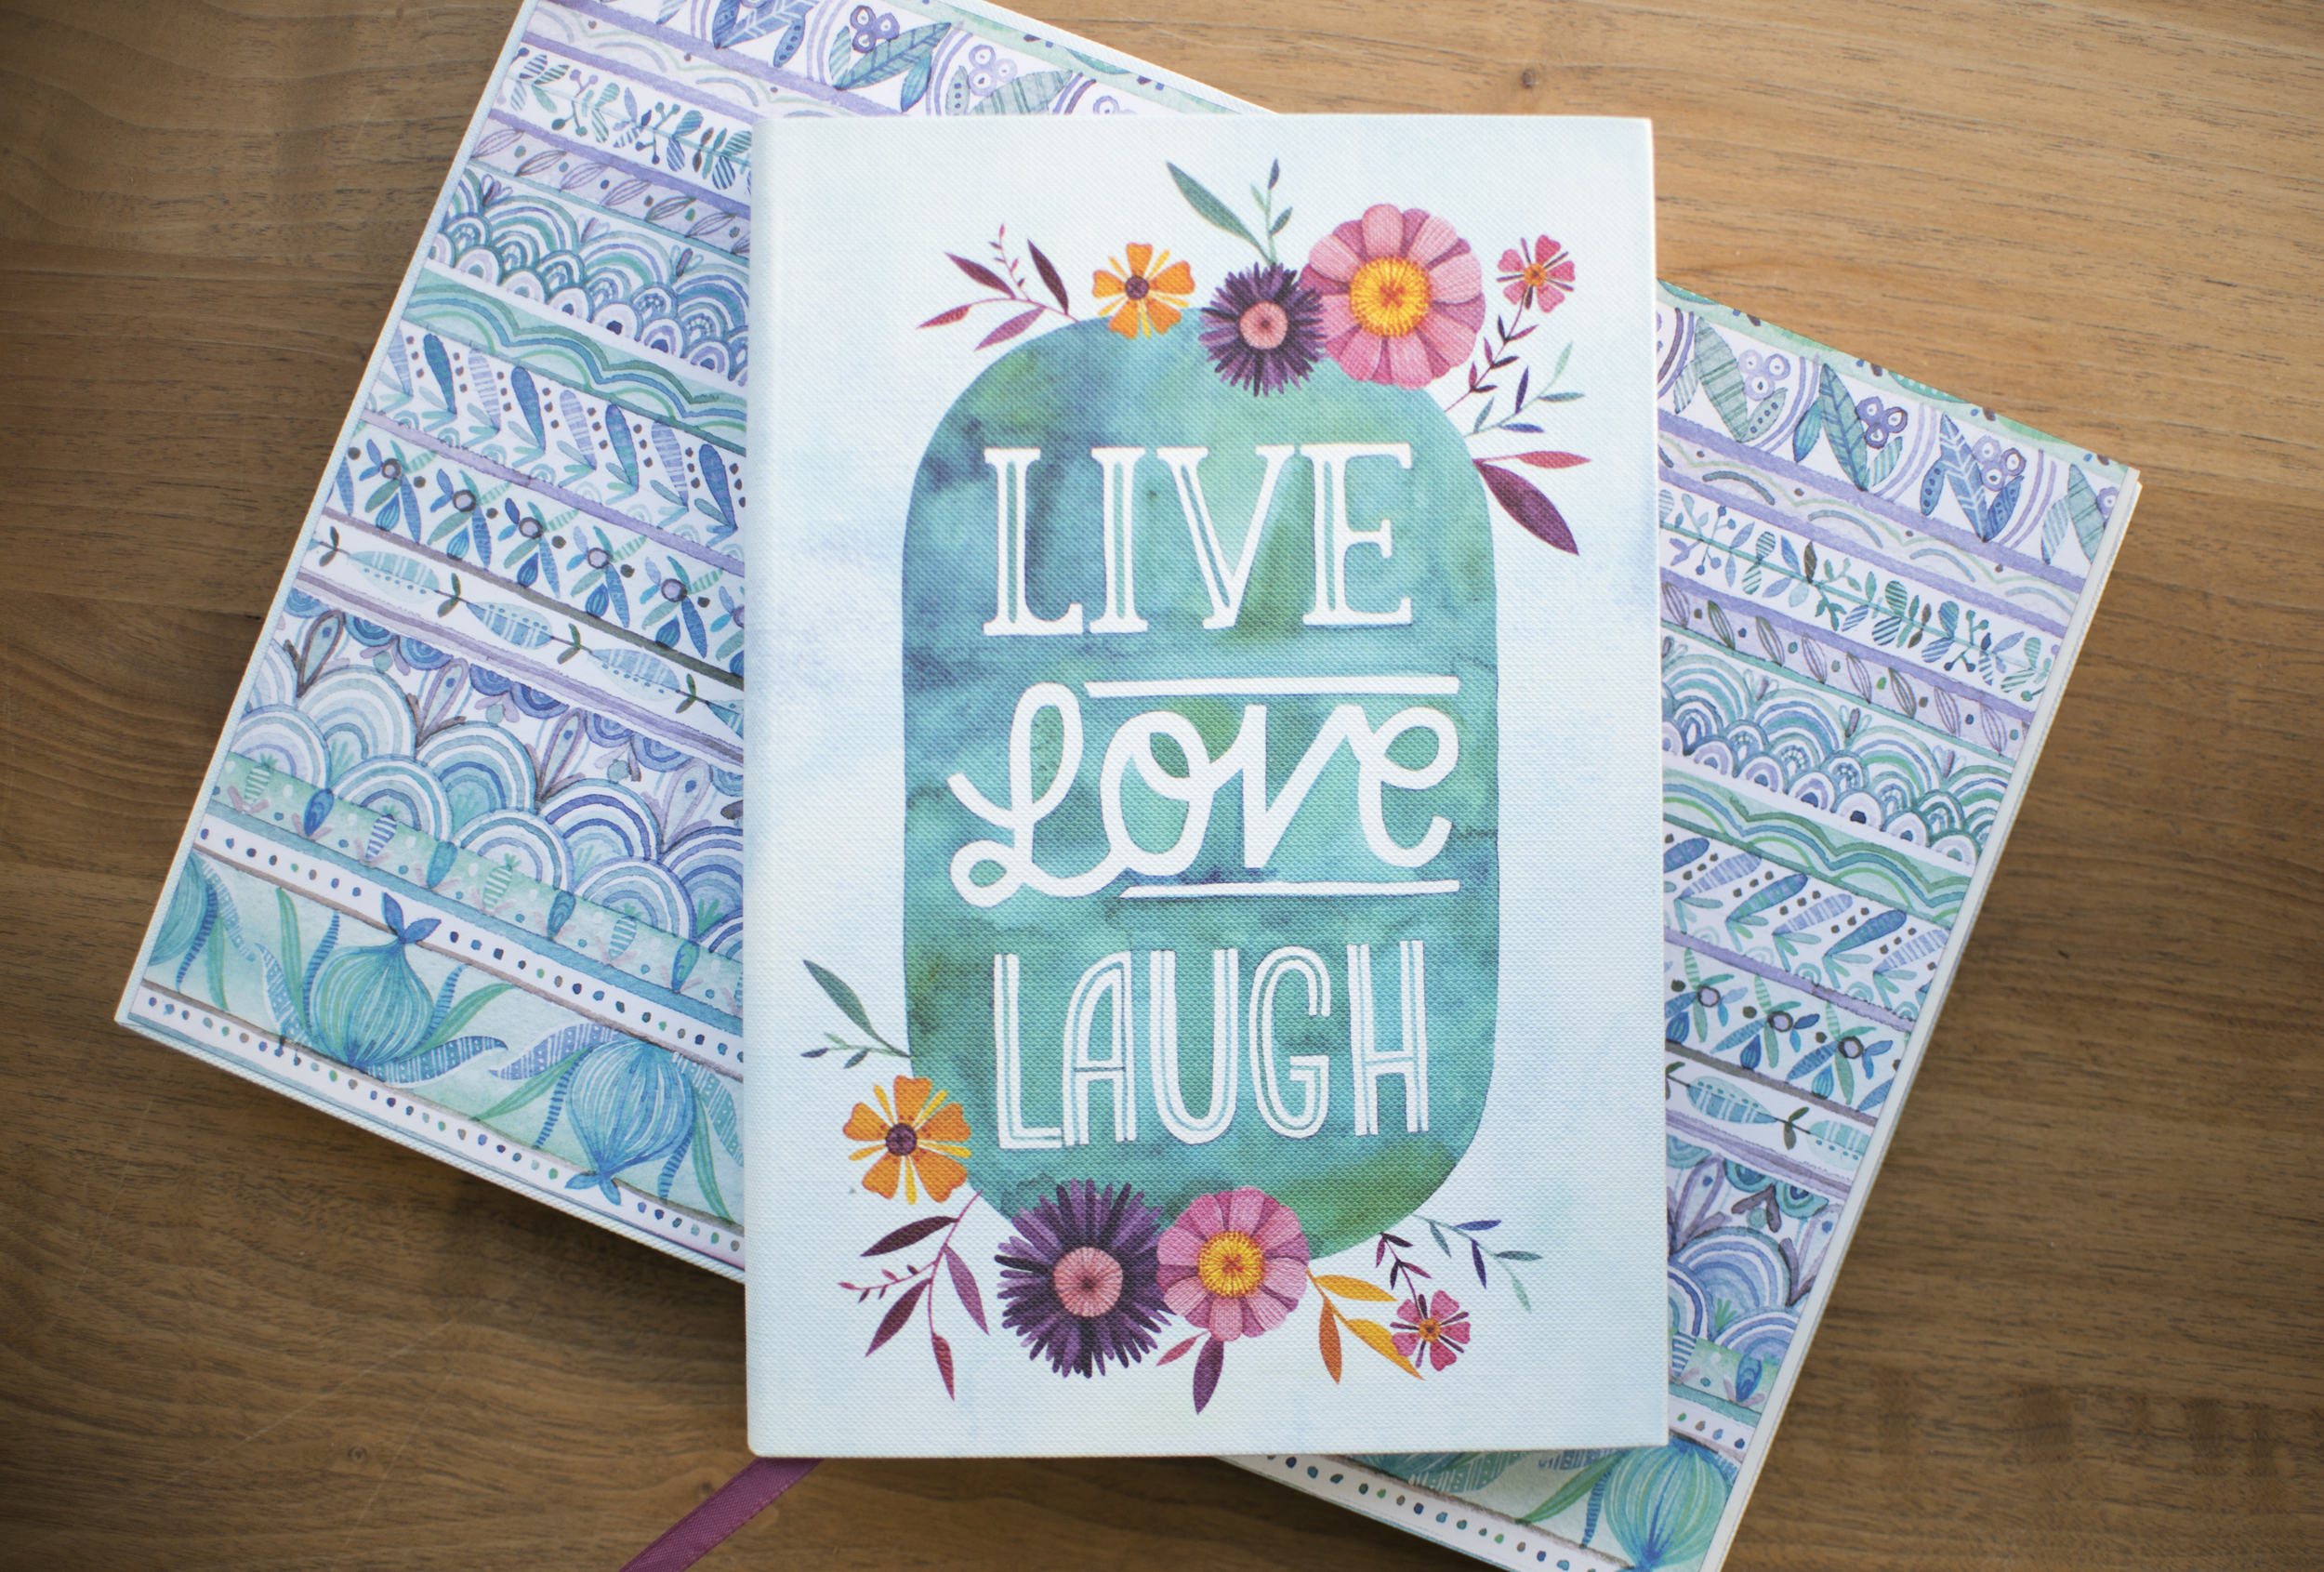 Studio Oh! "Live Love Laugh" journal by Becca Cahan